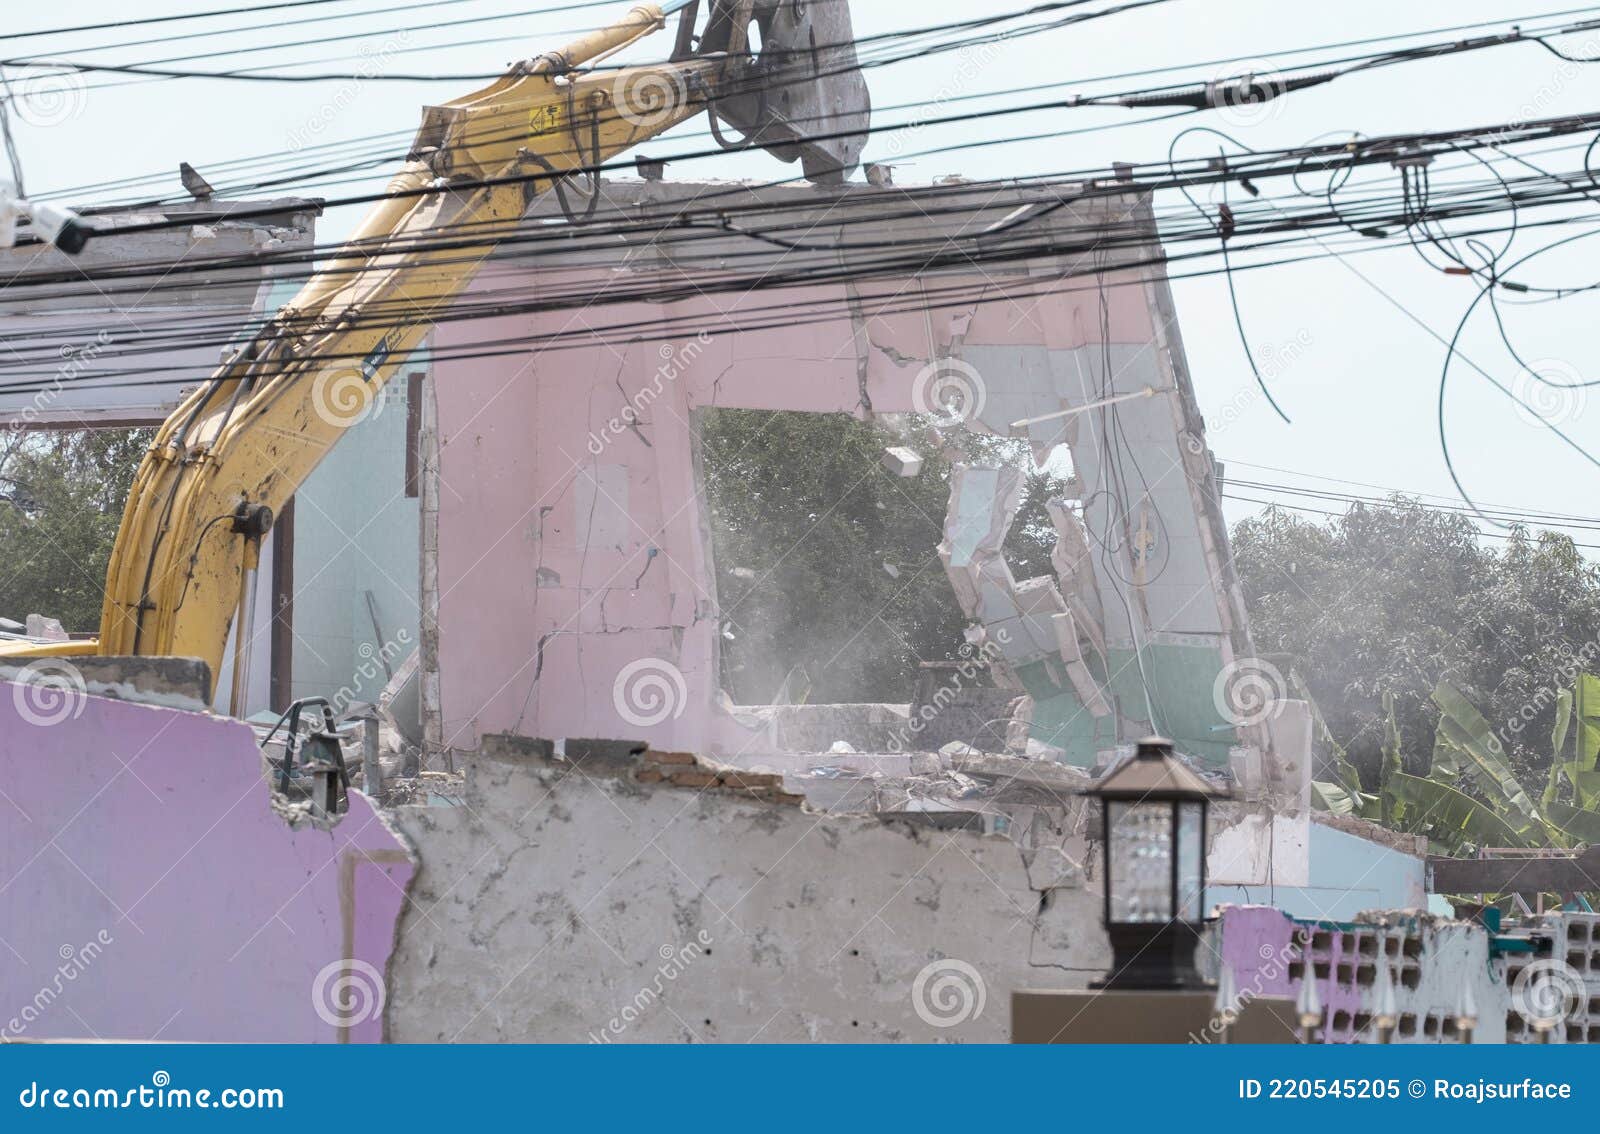 big yellow excavator removal home building by destroy pik concrete wall. uproot old construction house for development new project